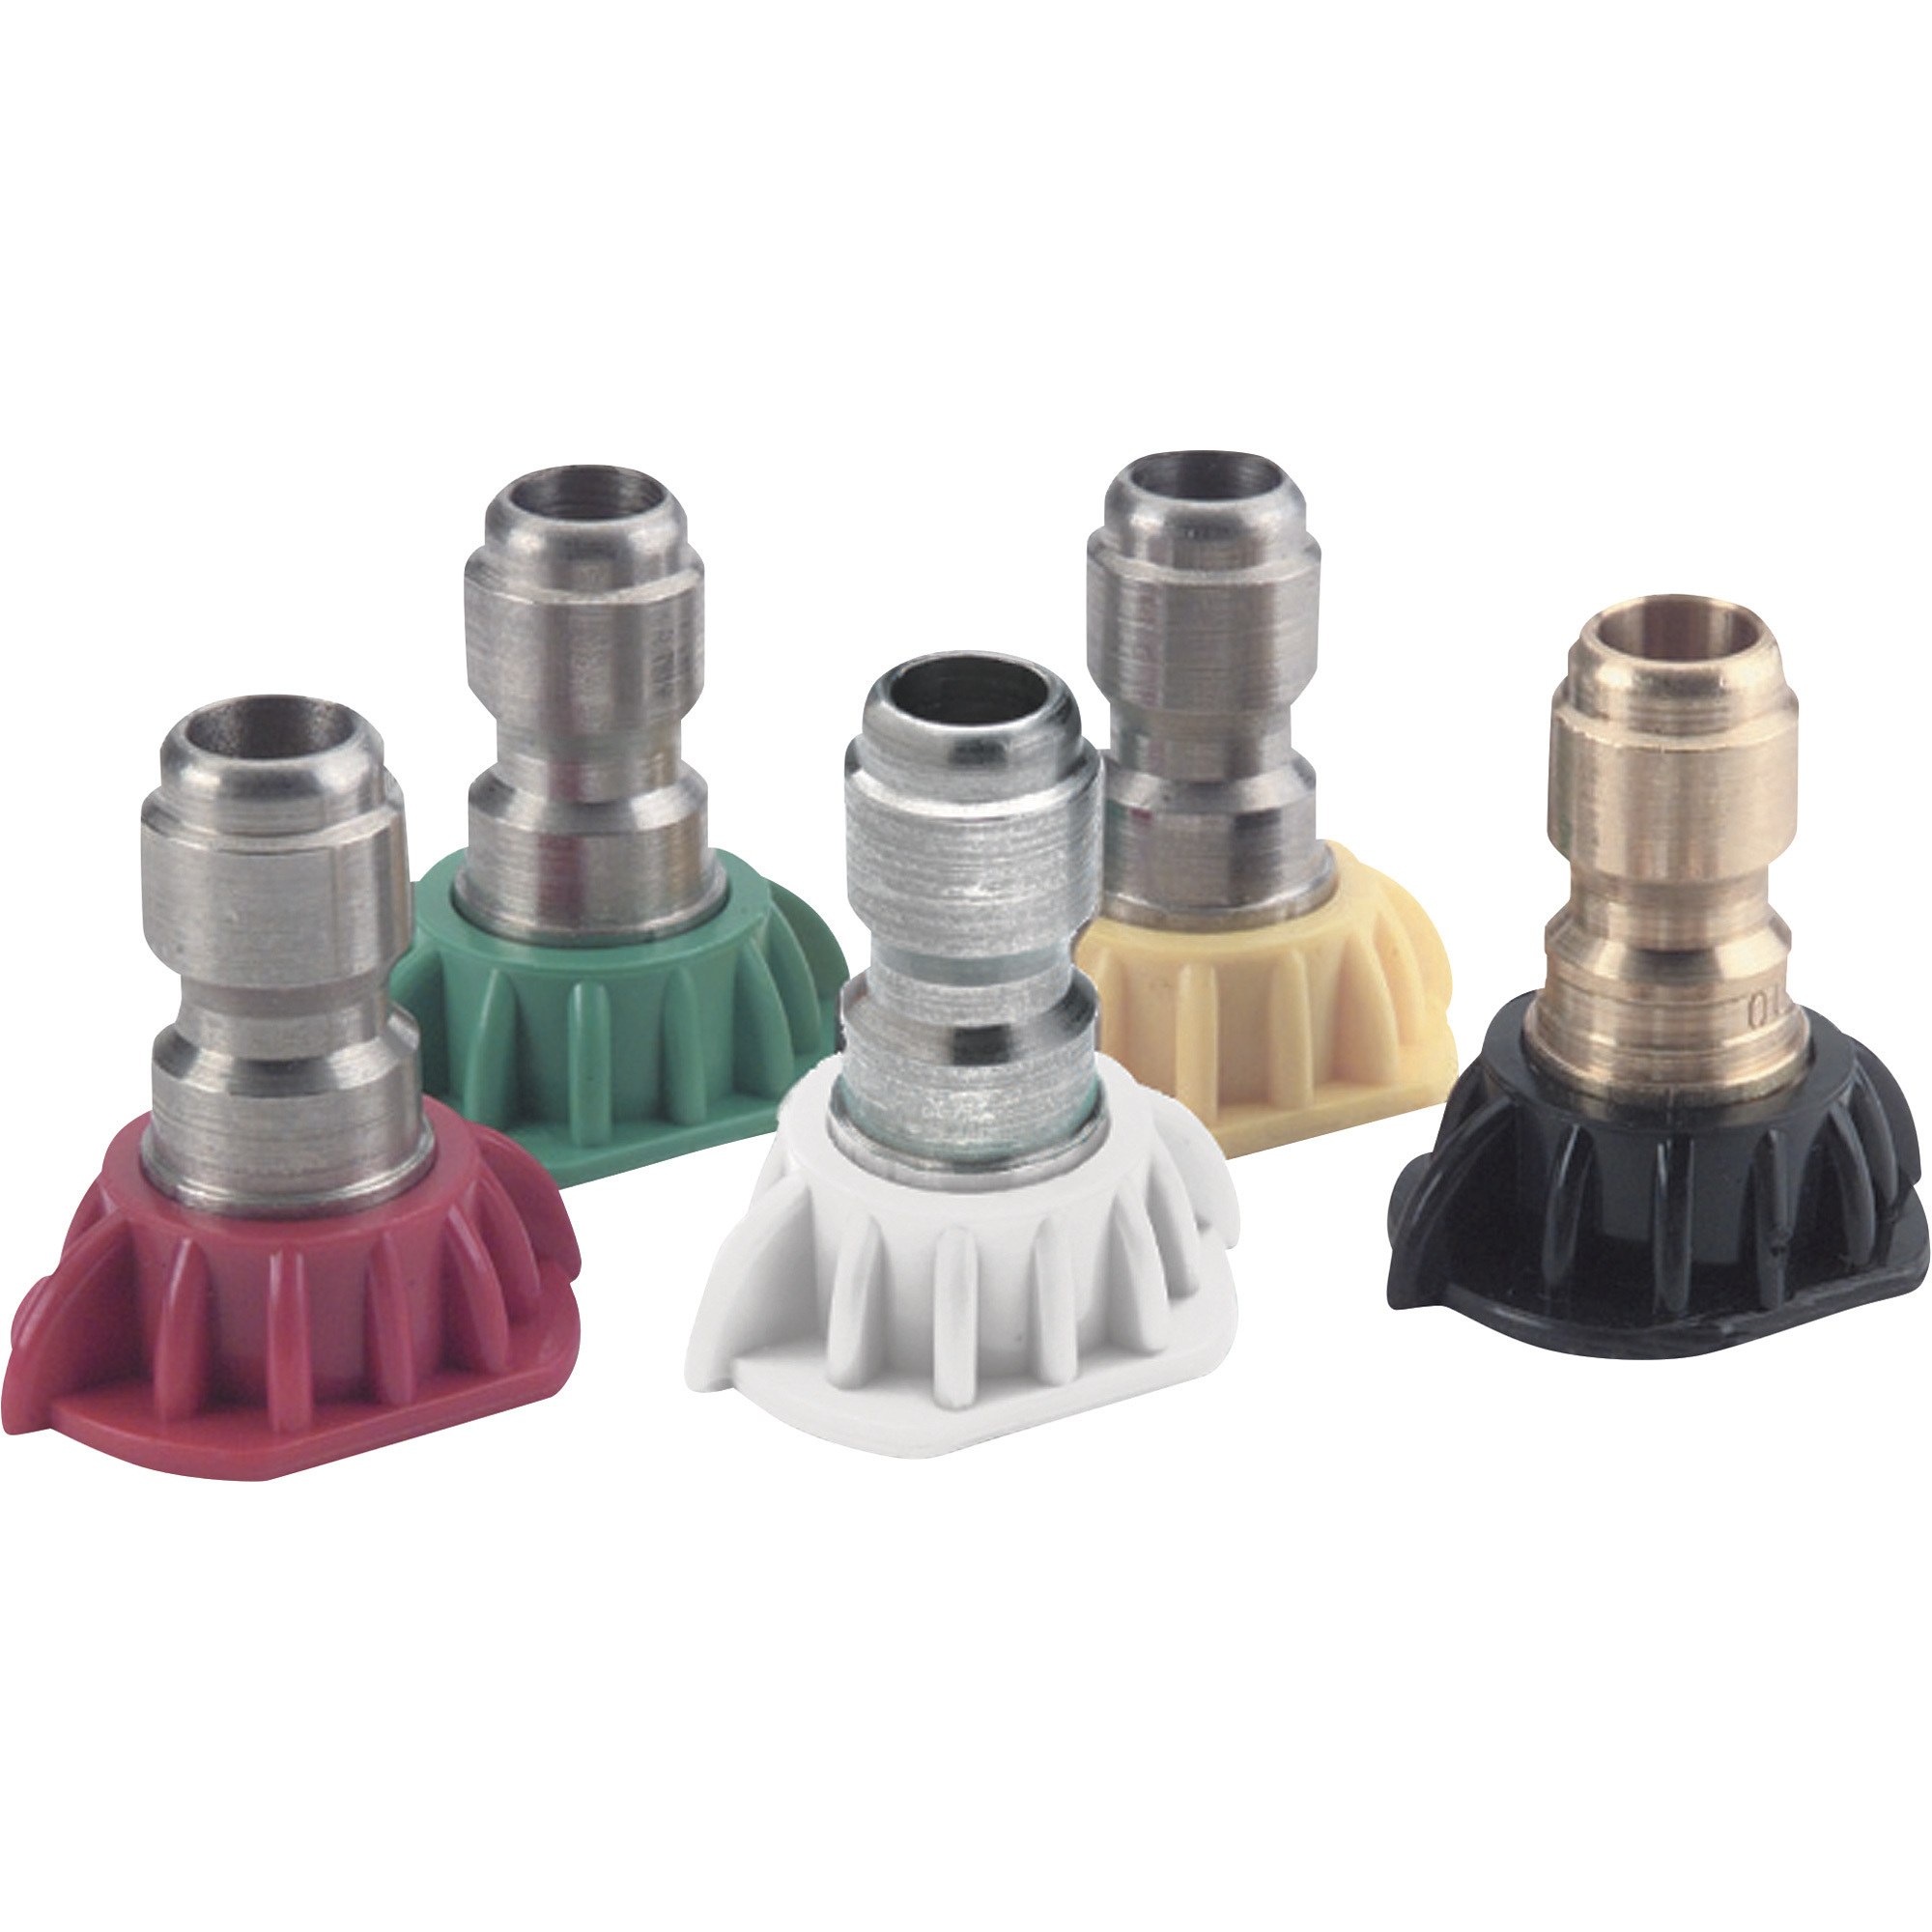 NorthStar 5-Pack Pressure Washer Quick Couple Nozzle Set â 4.0 Size, Model N105084P